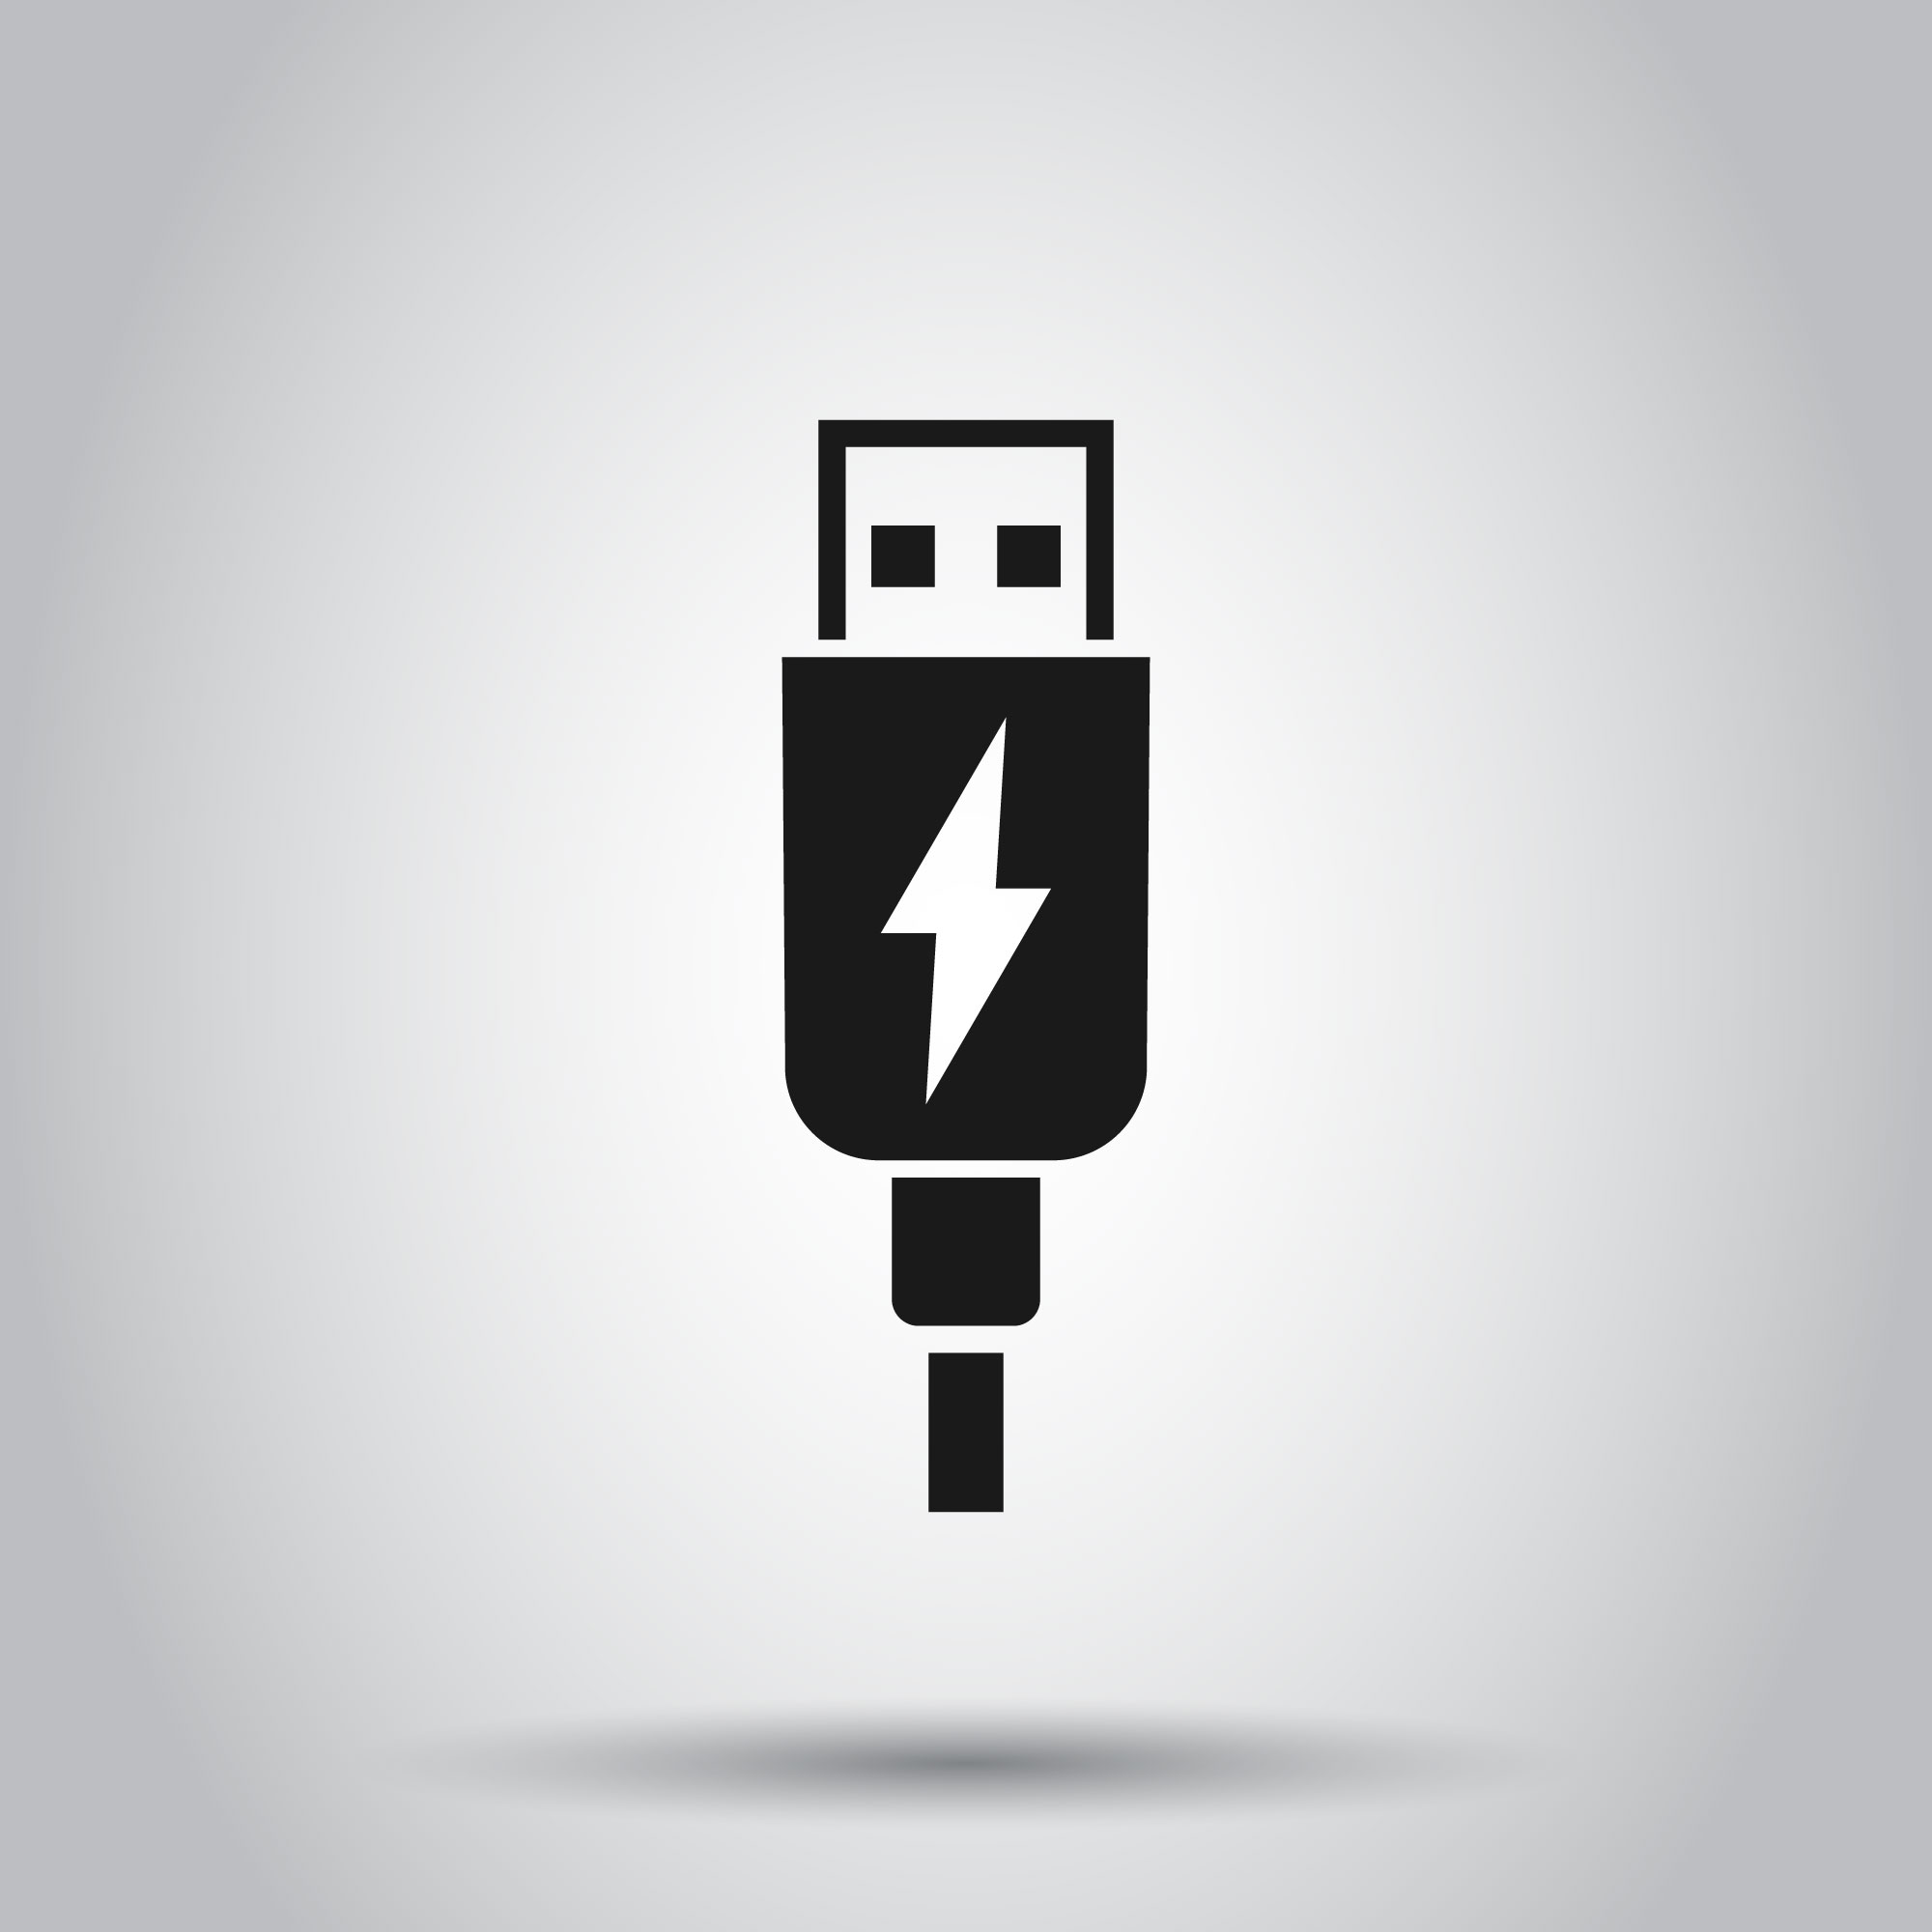 Usb cable icon in flat style.